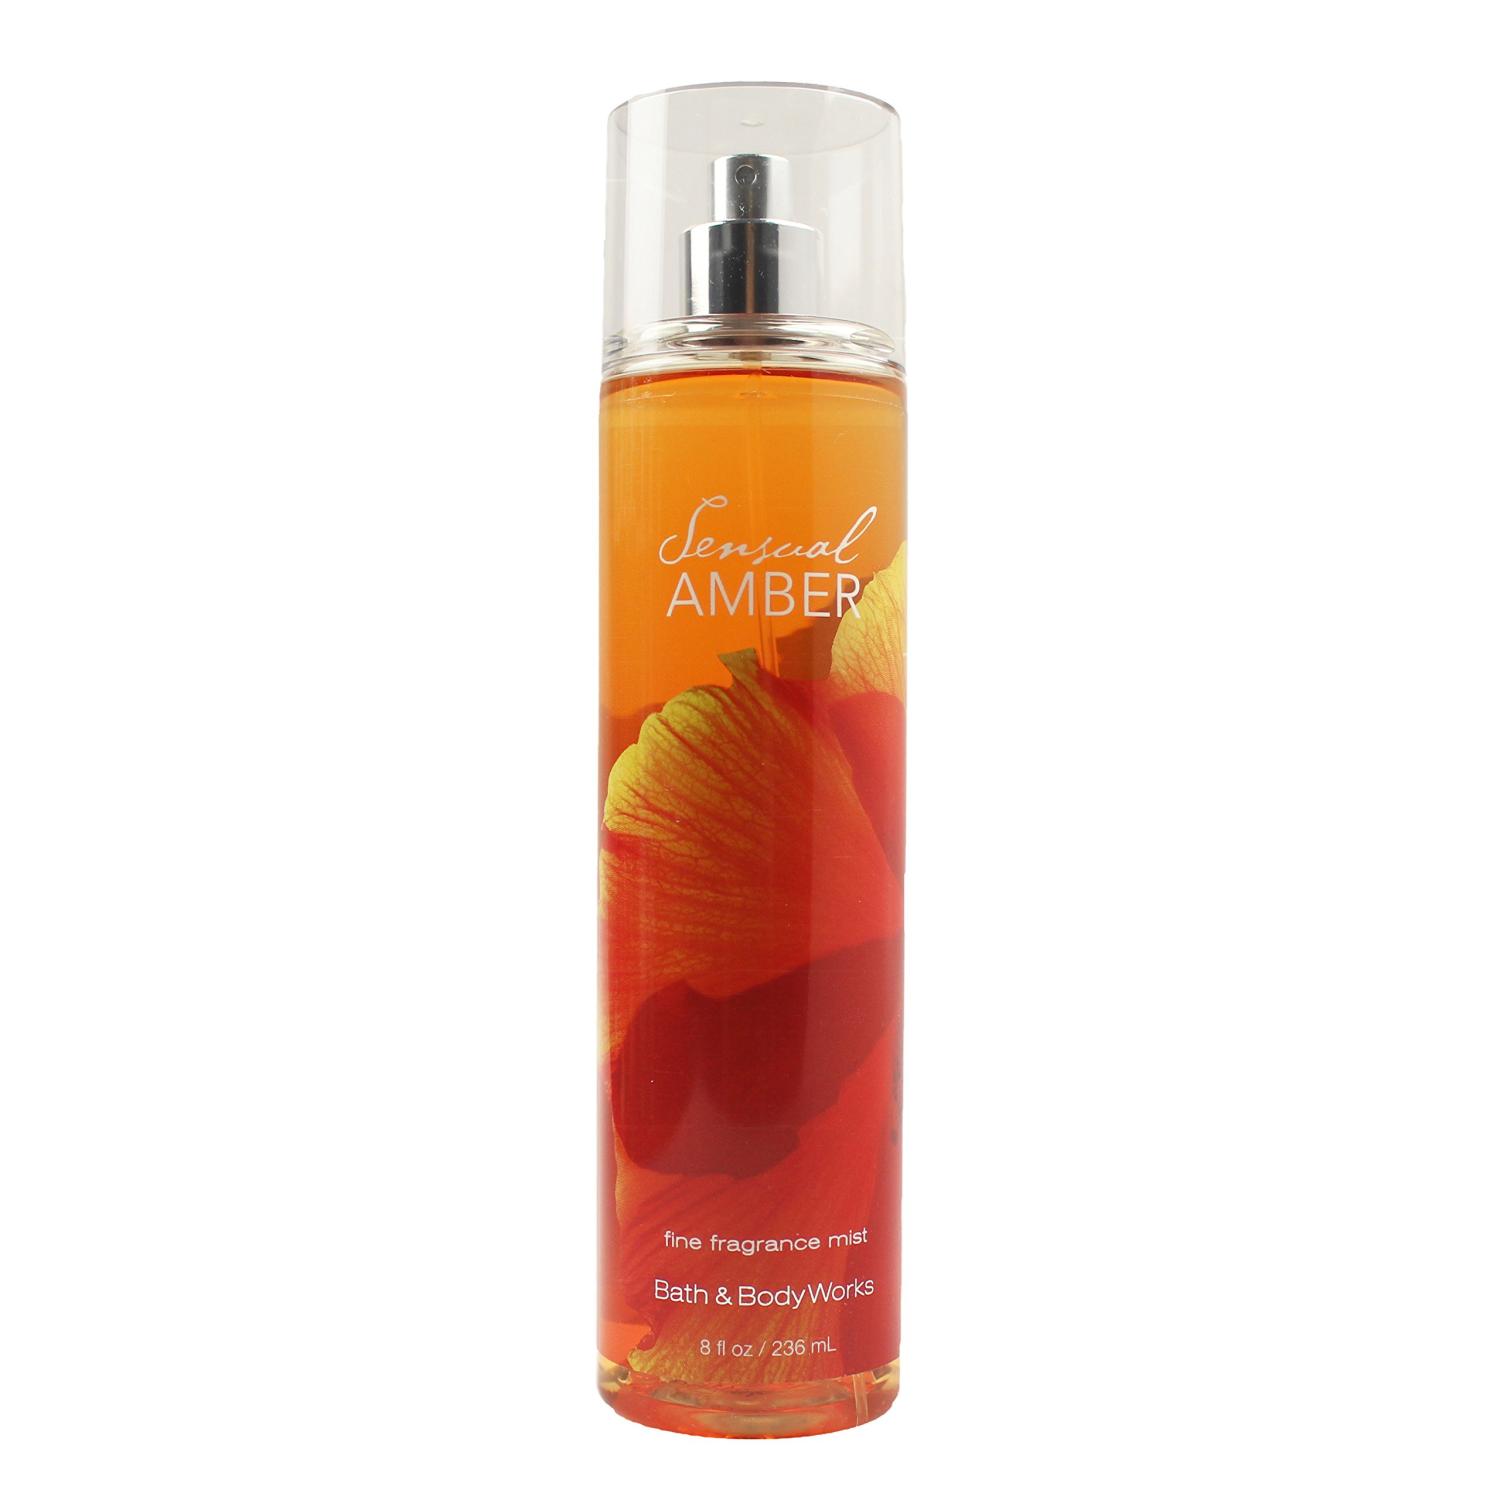 Bath & Body Works Sensual Amber EDT [DISCONTINUED] - Reviews